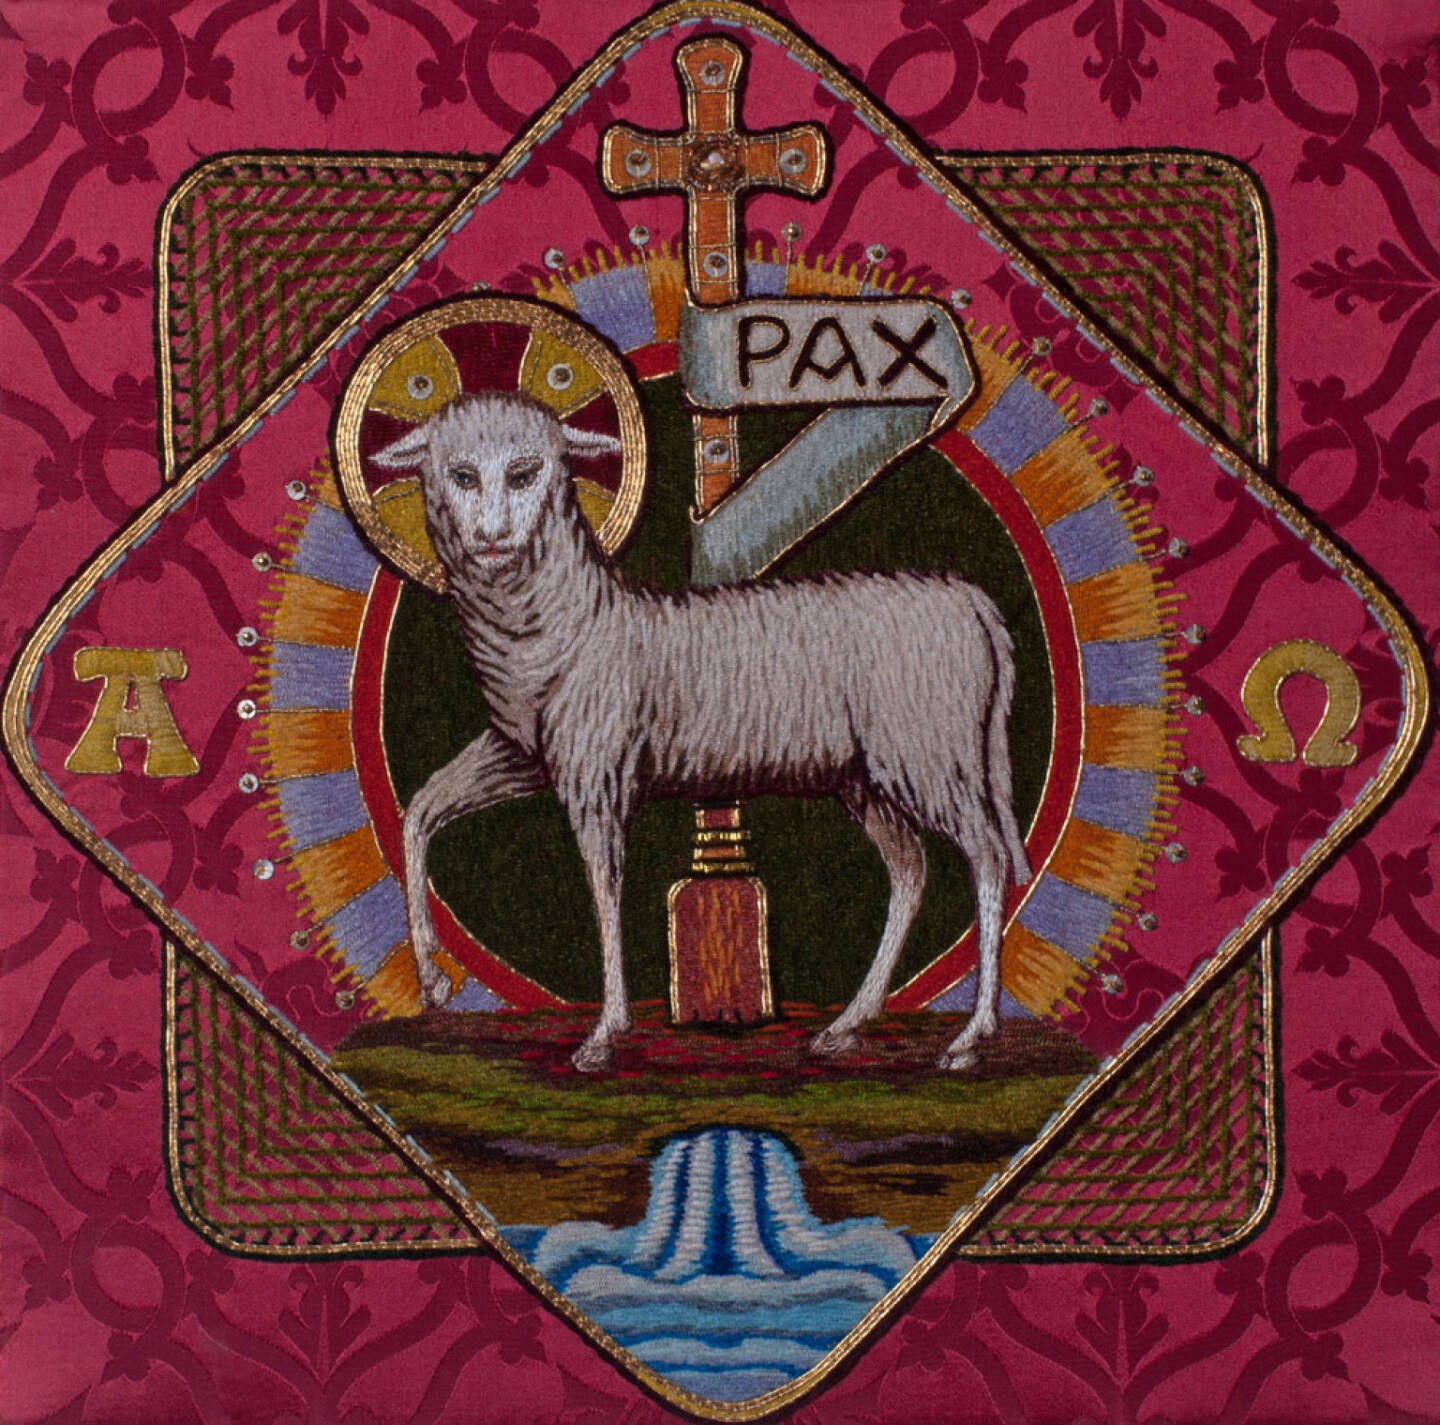 Pax, Friede, peace, Lamm, Schaf, http://www.shutterstock.com/de/pic-185473529/stock-photo-traditional-burse-with-hand-embroidered-lamb-of-god-easter-symbol-made-by-benedictine-sisters-in.html